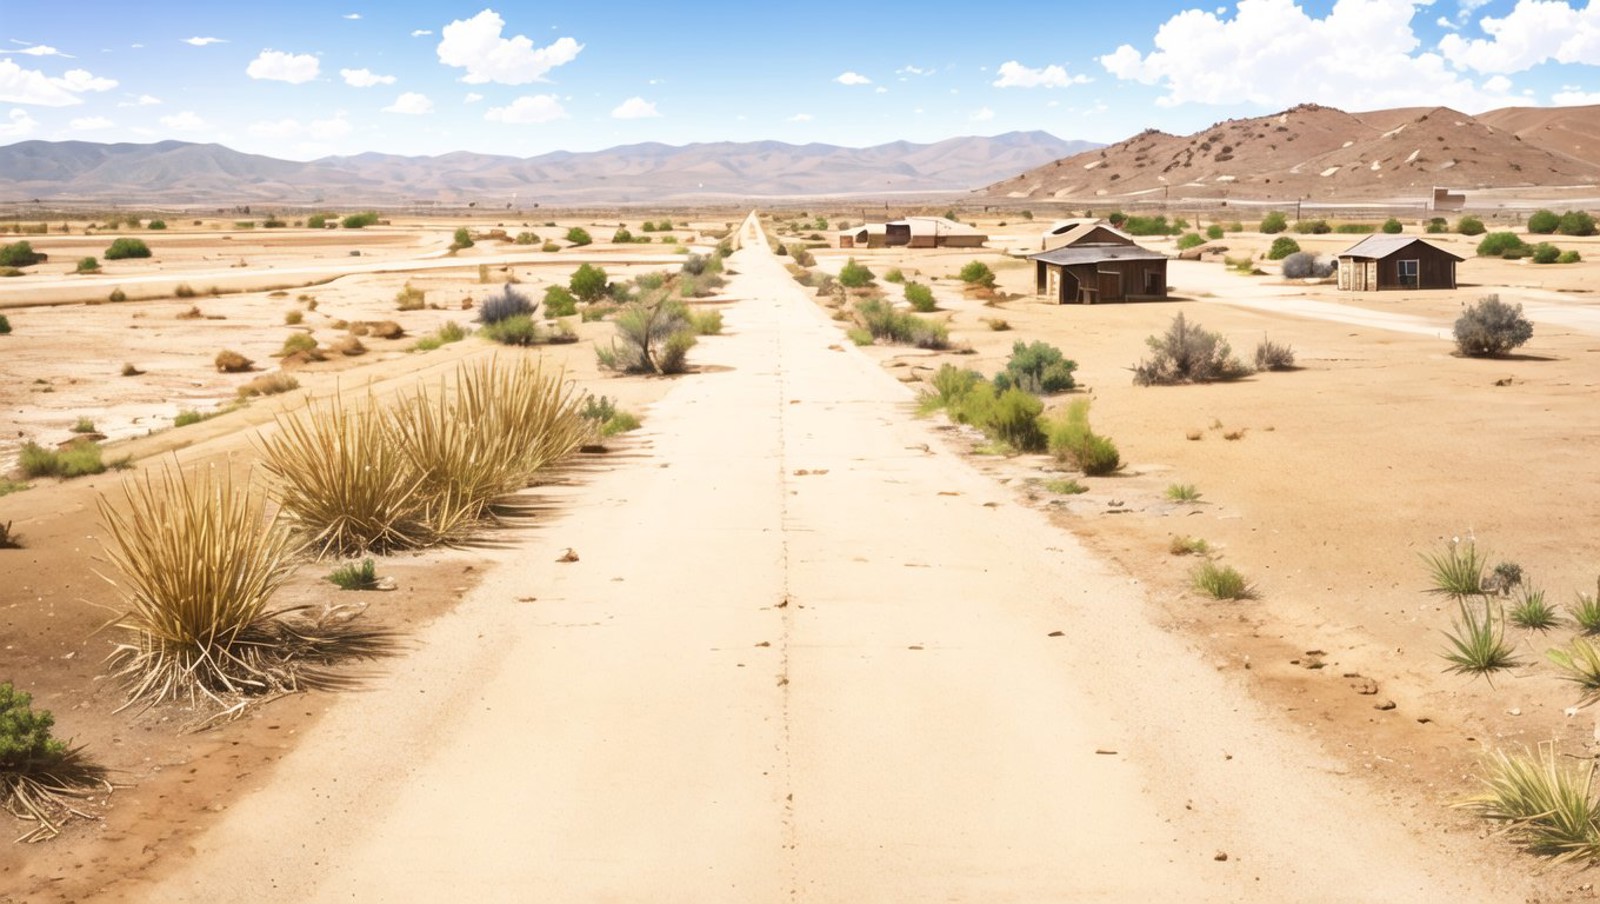 <lora:vn_bg:1> vn_bg, no humans, A lonely, old western town with a single dirt road, tumbleweeds blowing across the path, ...